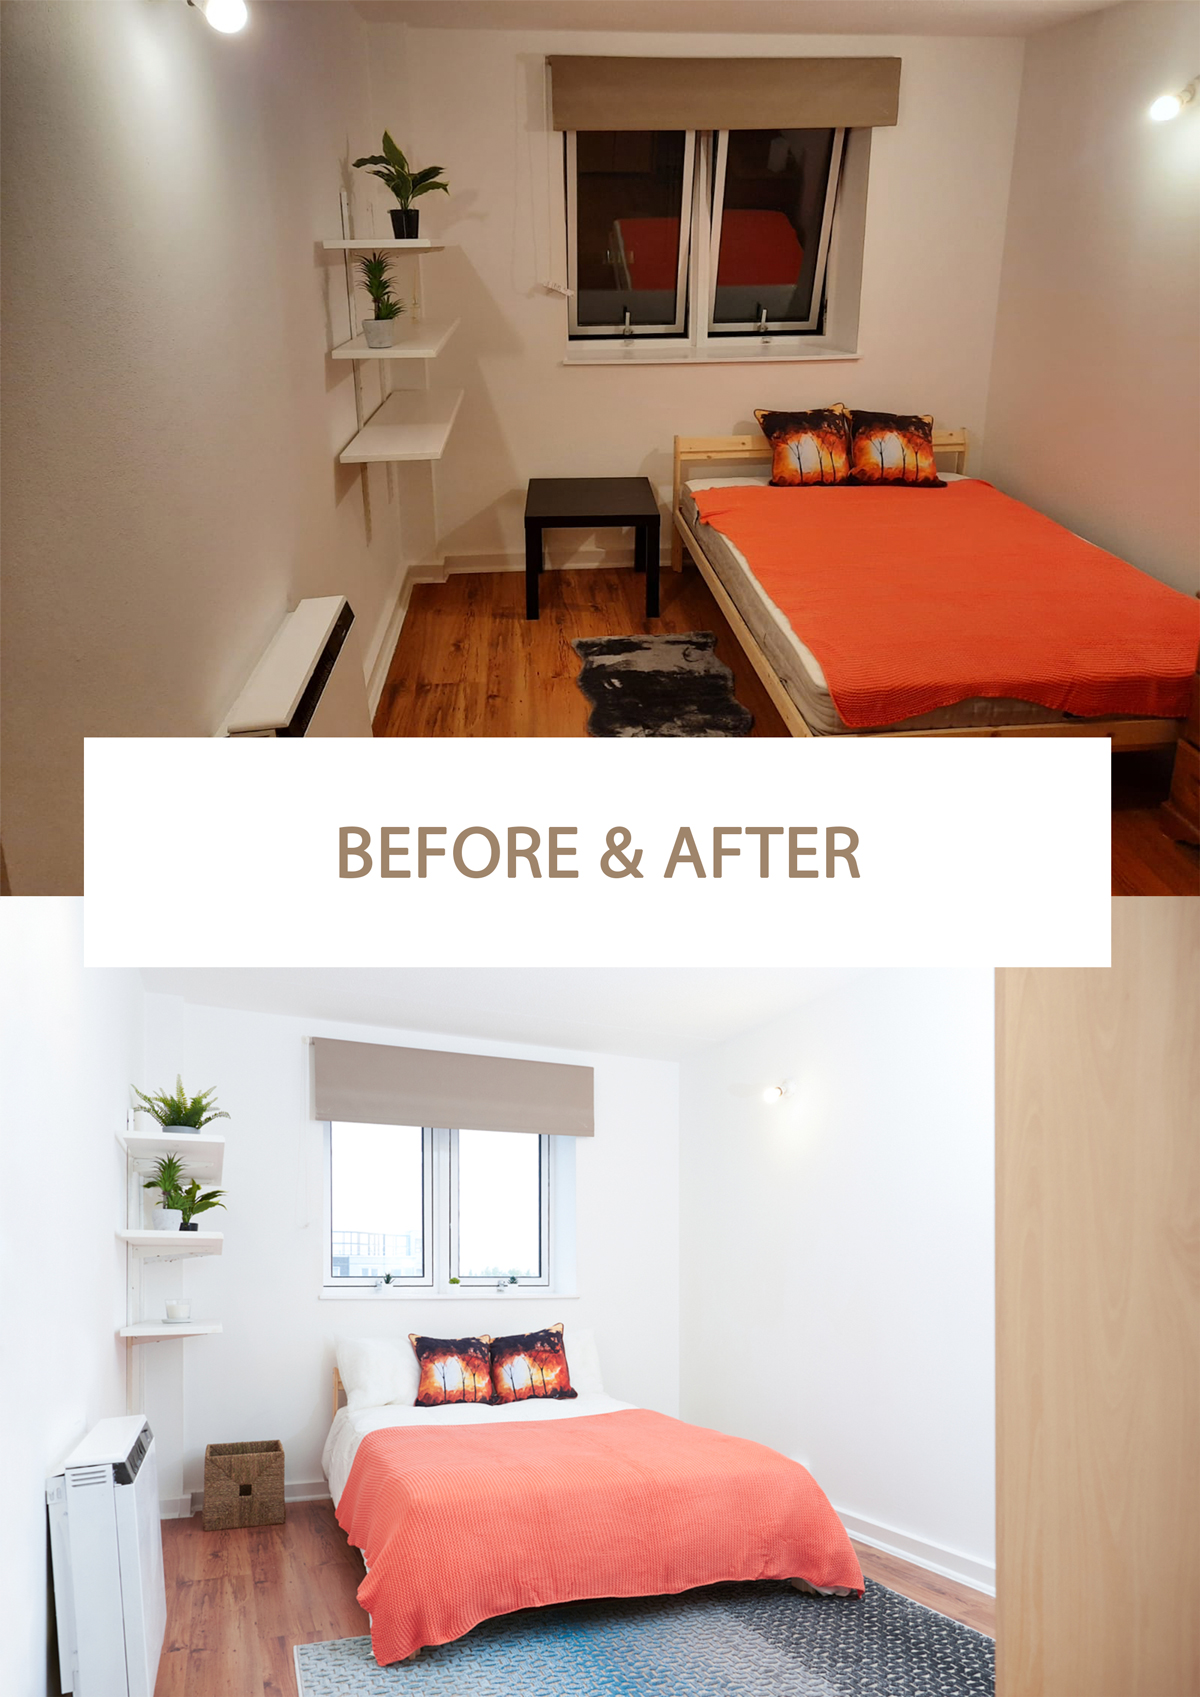 Before and After property photography